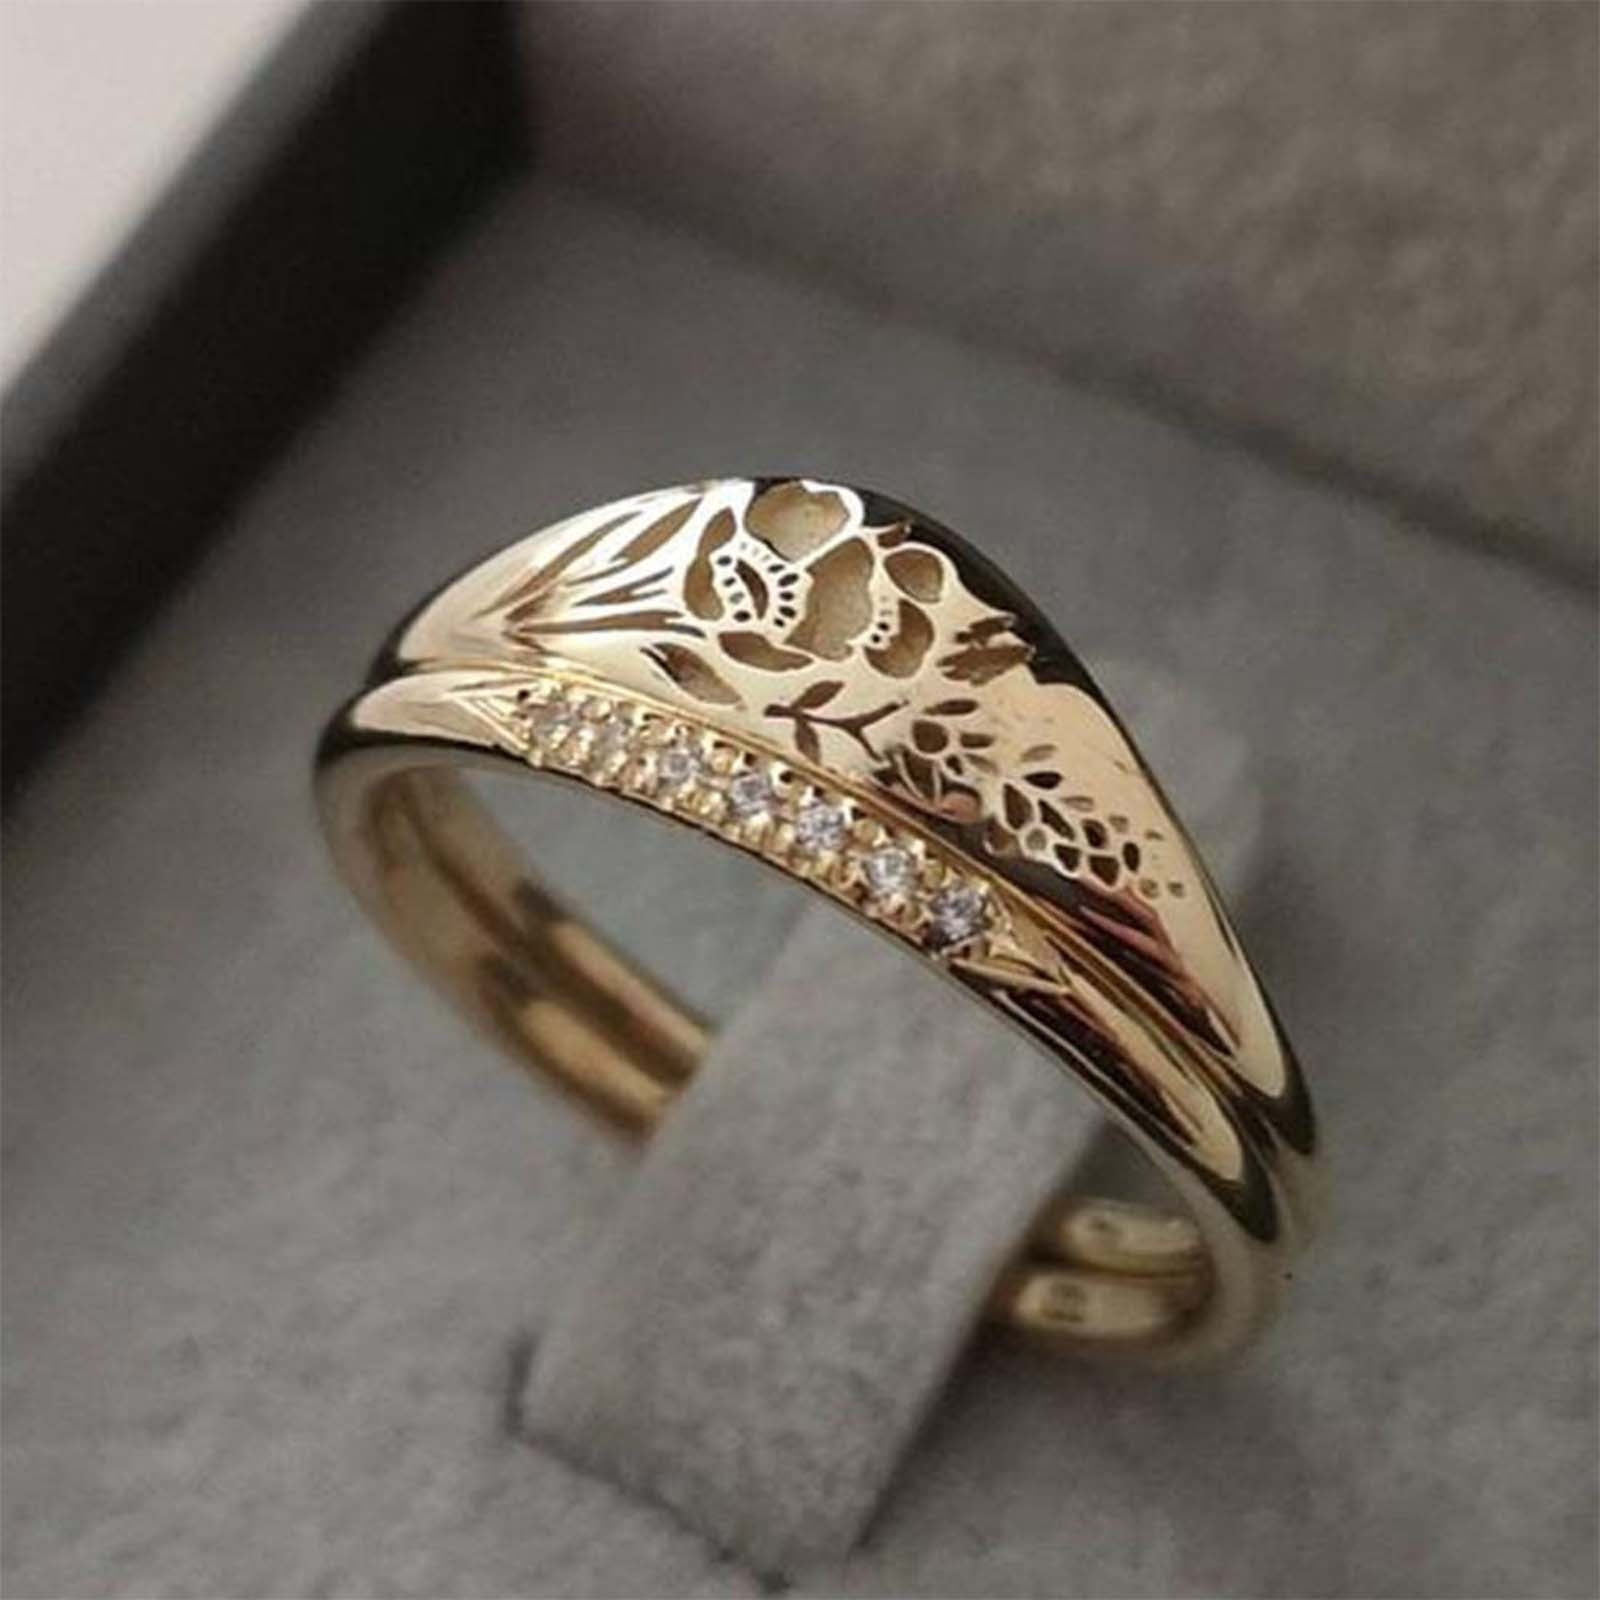 Looking for Gold Finger Ring Designs With Price? Check These Out!